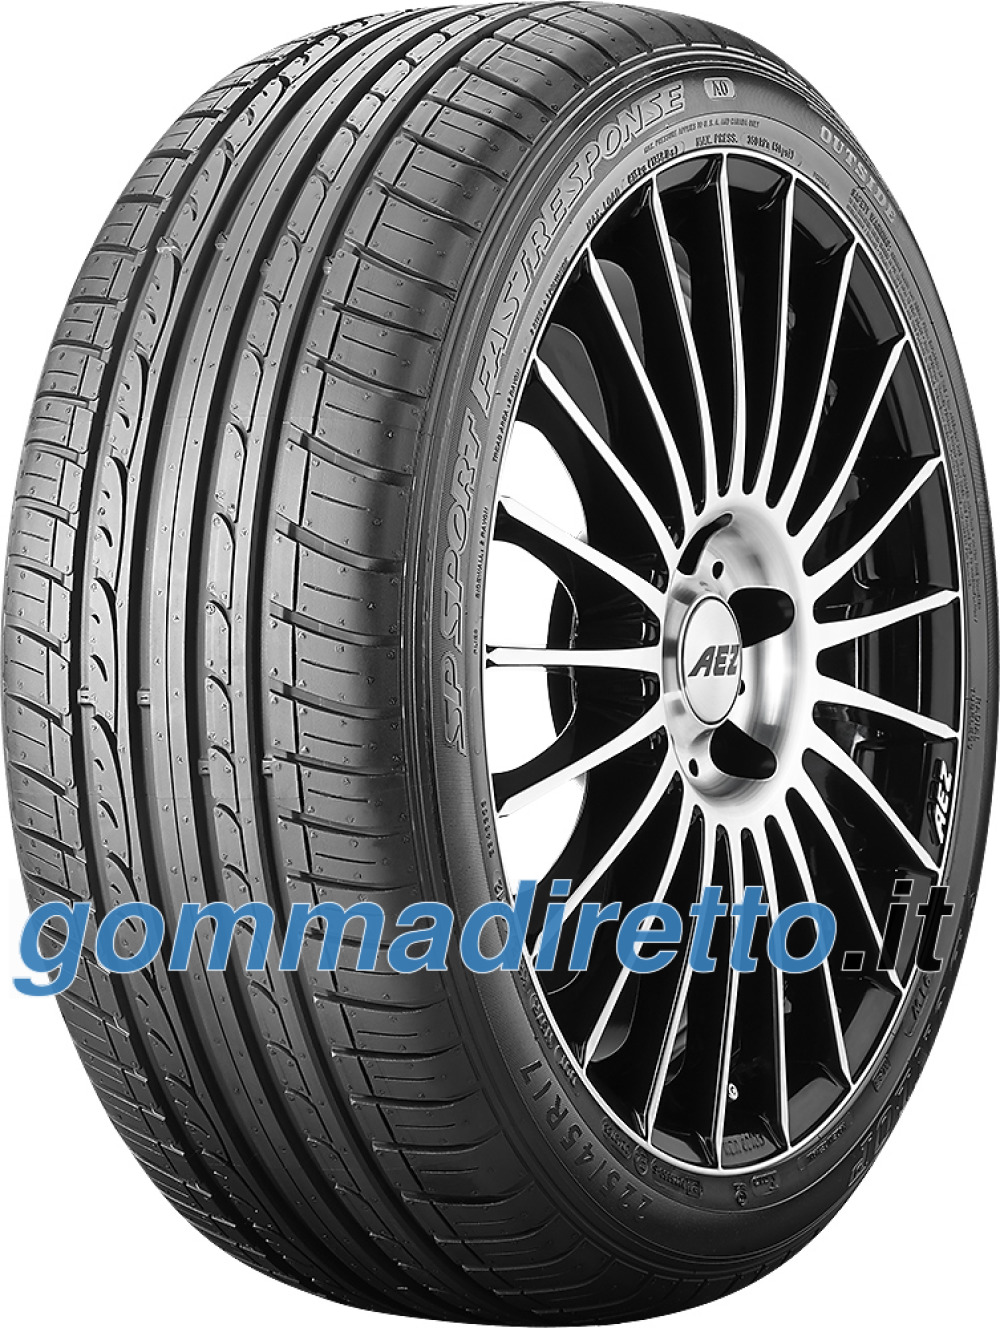 Image of Dunlop SP Sport FastResponse ( 195/65 R15 91T MO )